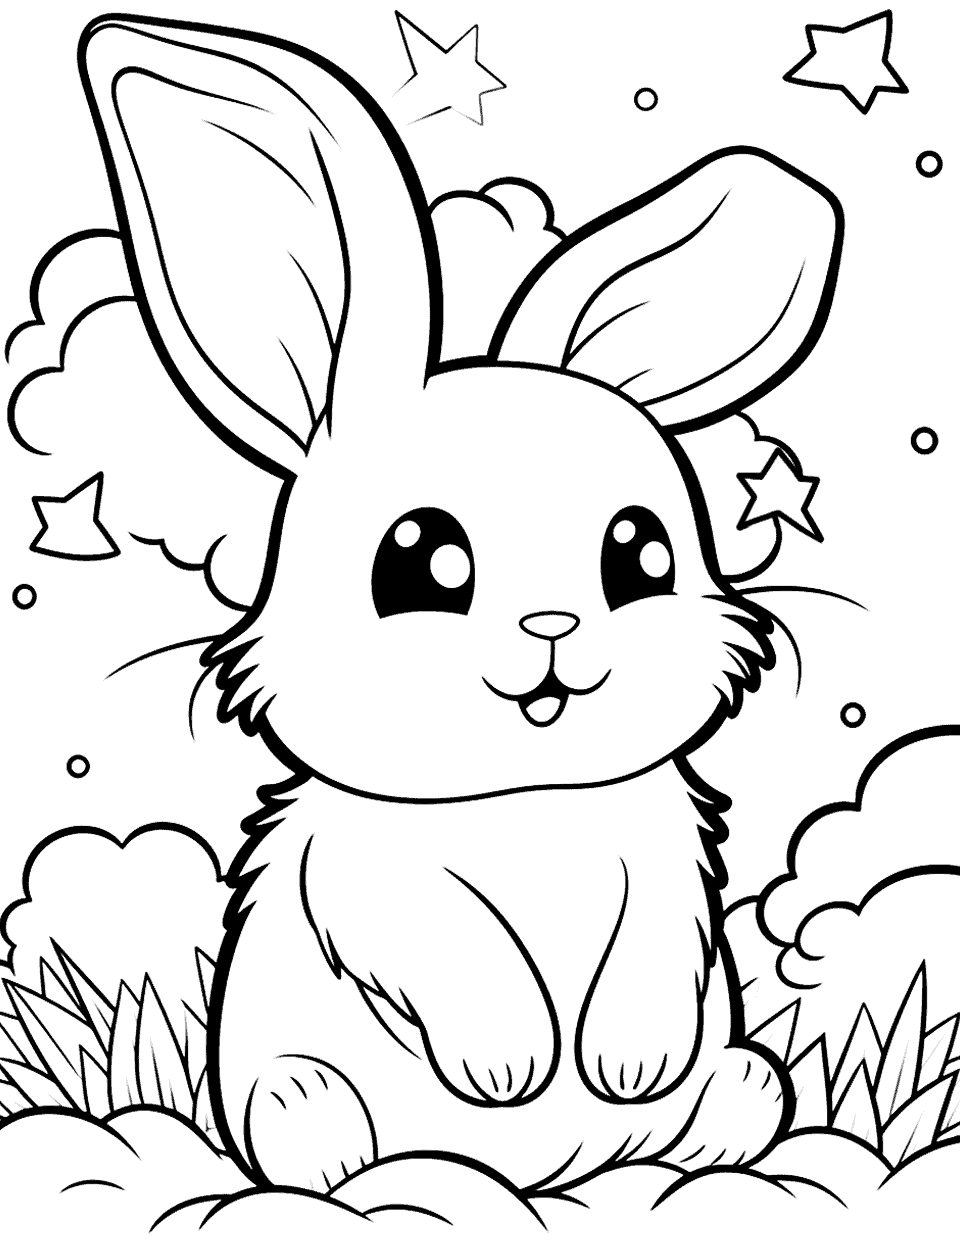 Bunny's Dreamworld with Clouds Bunny Coloring Page - A bunny looking up at the clouds and stars.